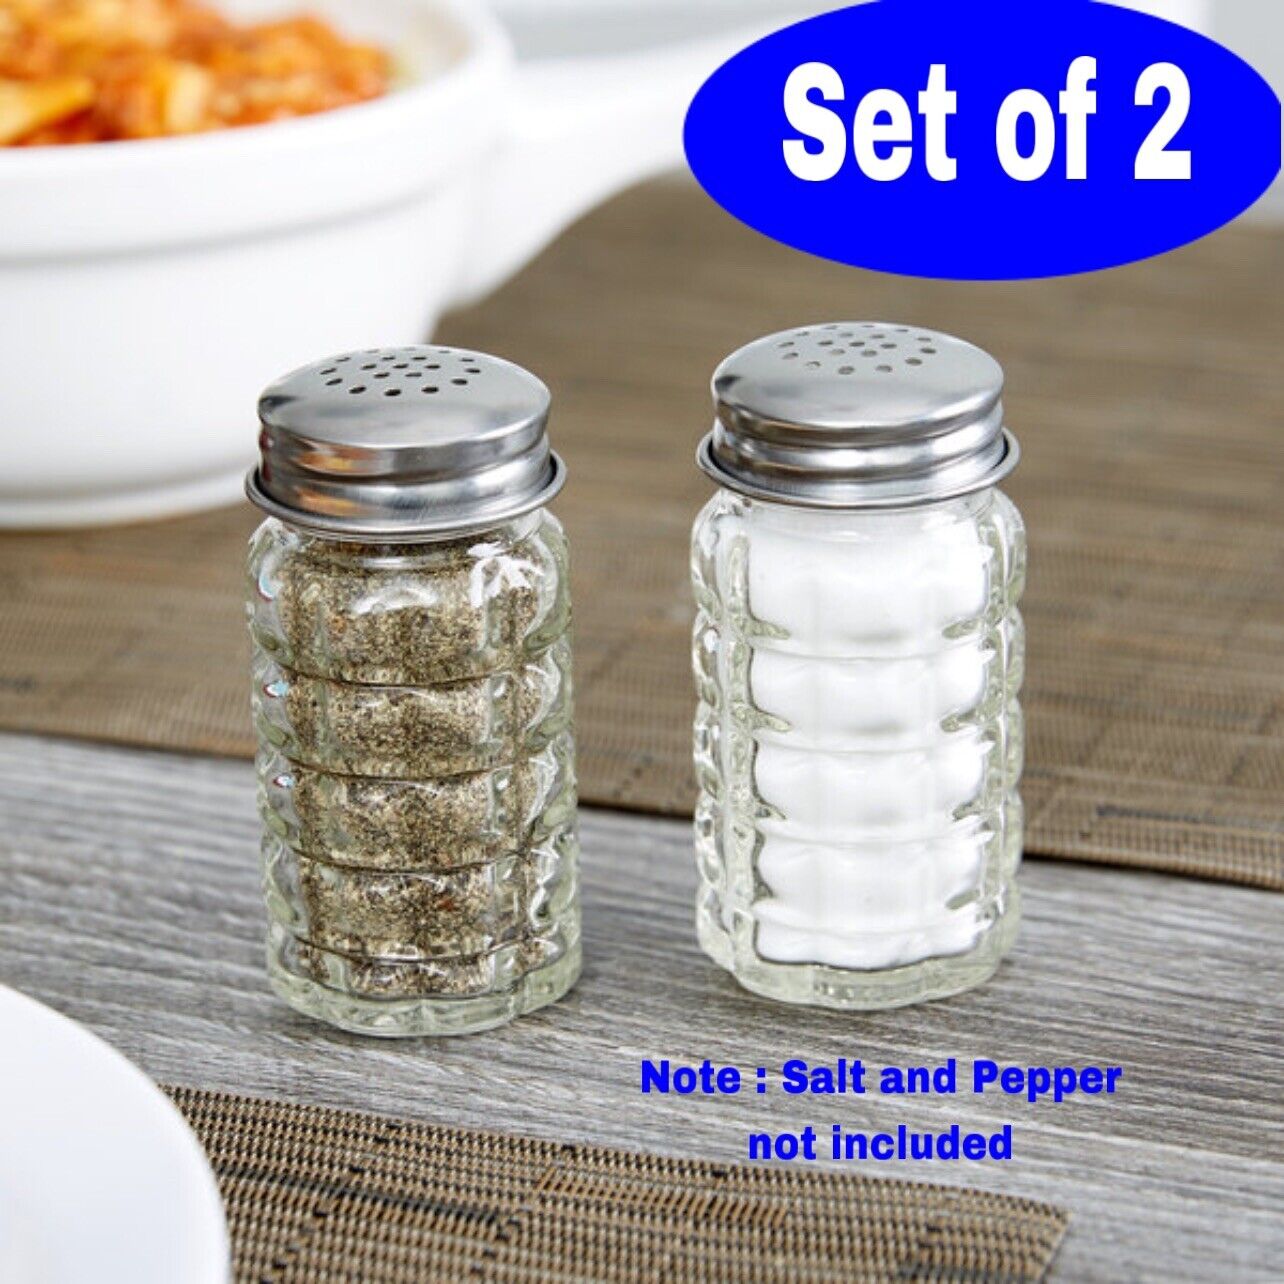 Set of 2 Retro Style Glass Salt and Pepper Shakers 1.5 oz with Stainless Tops